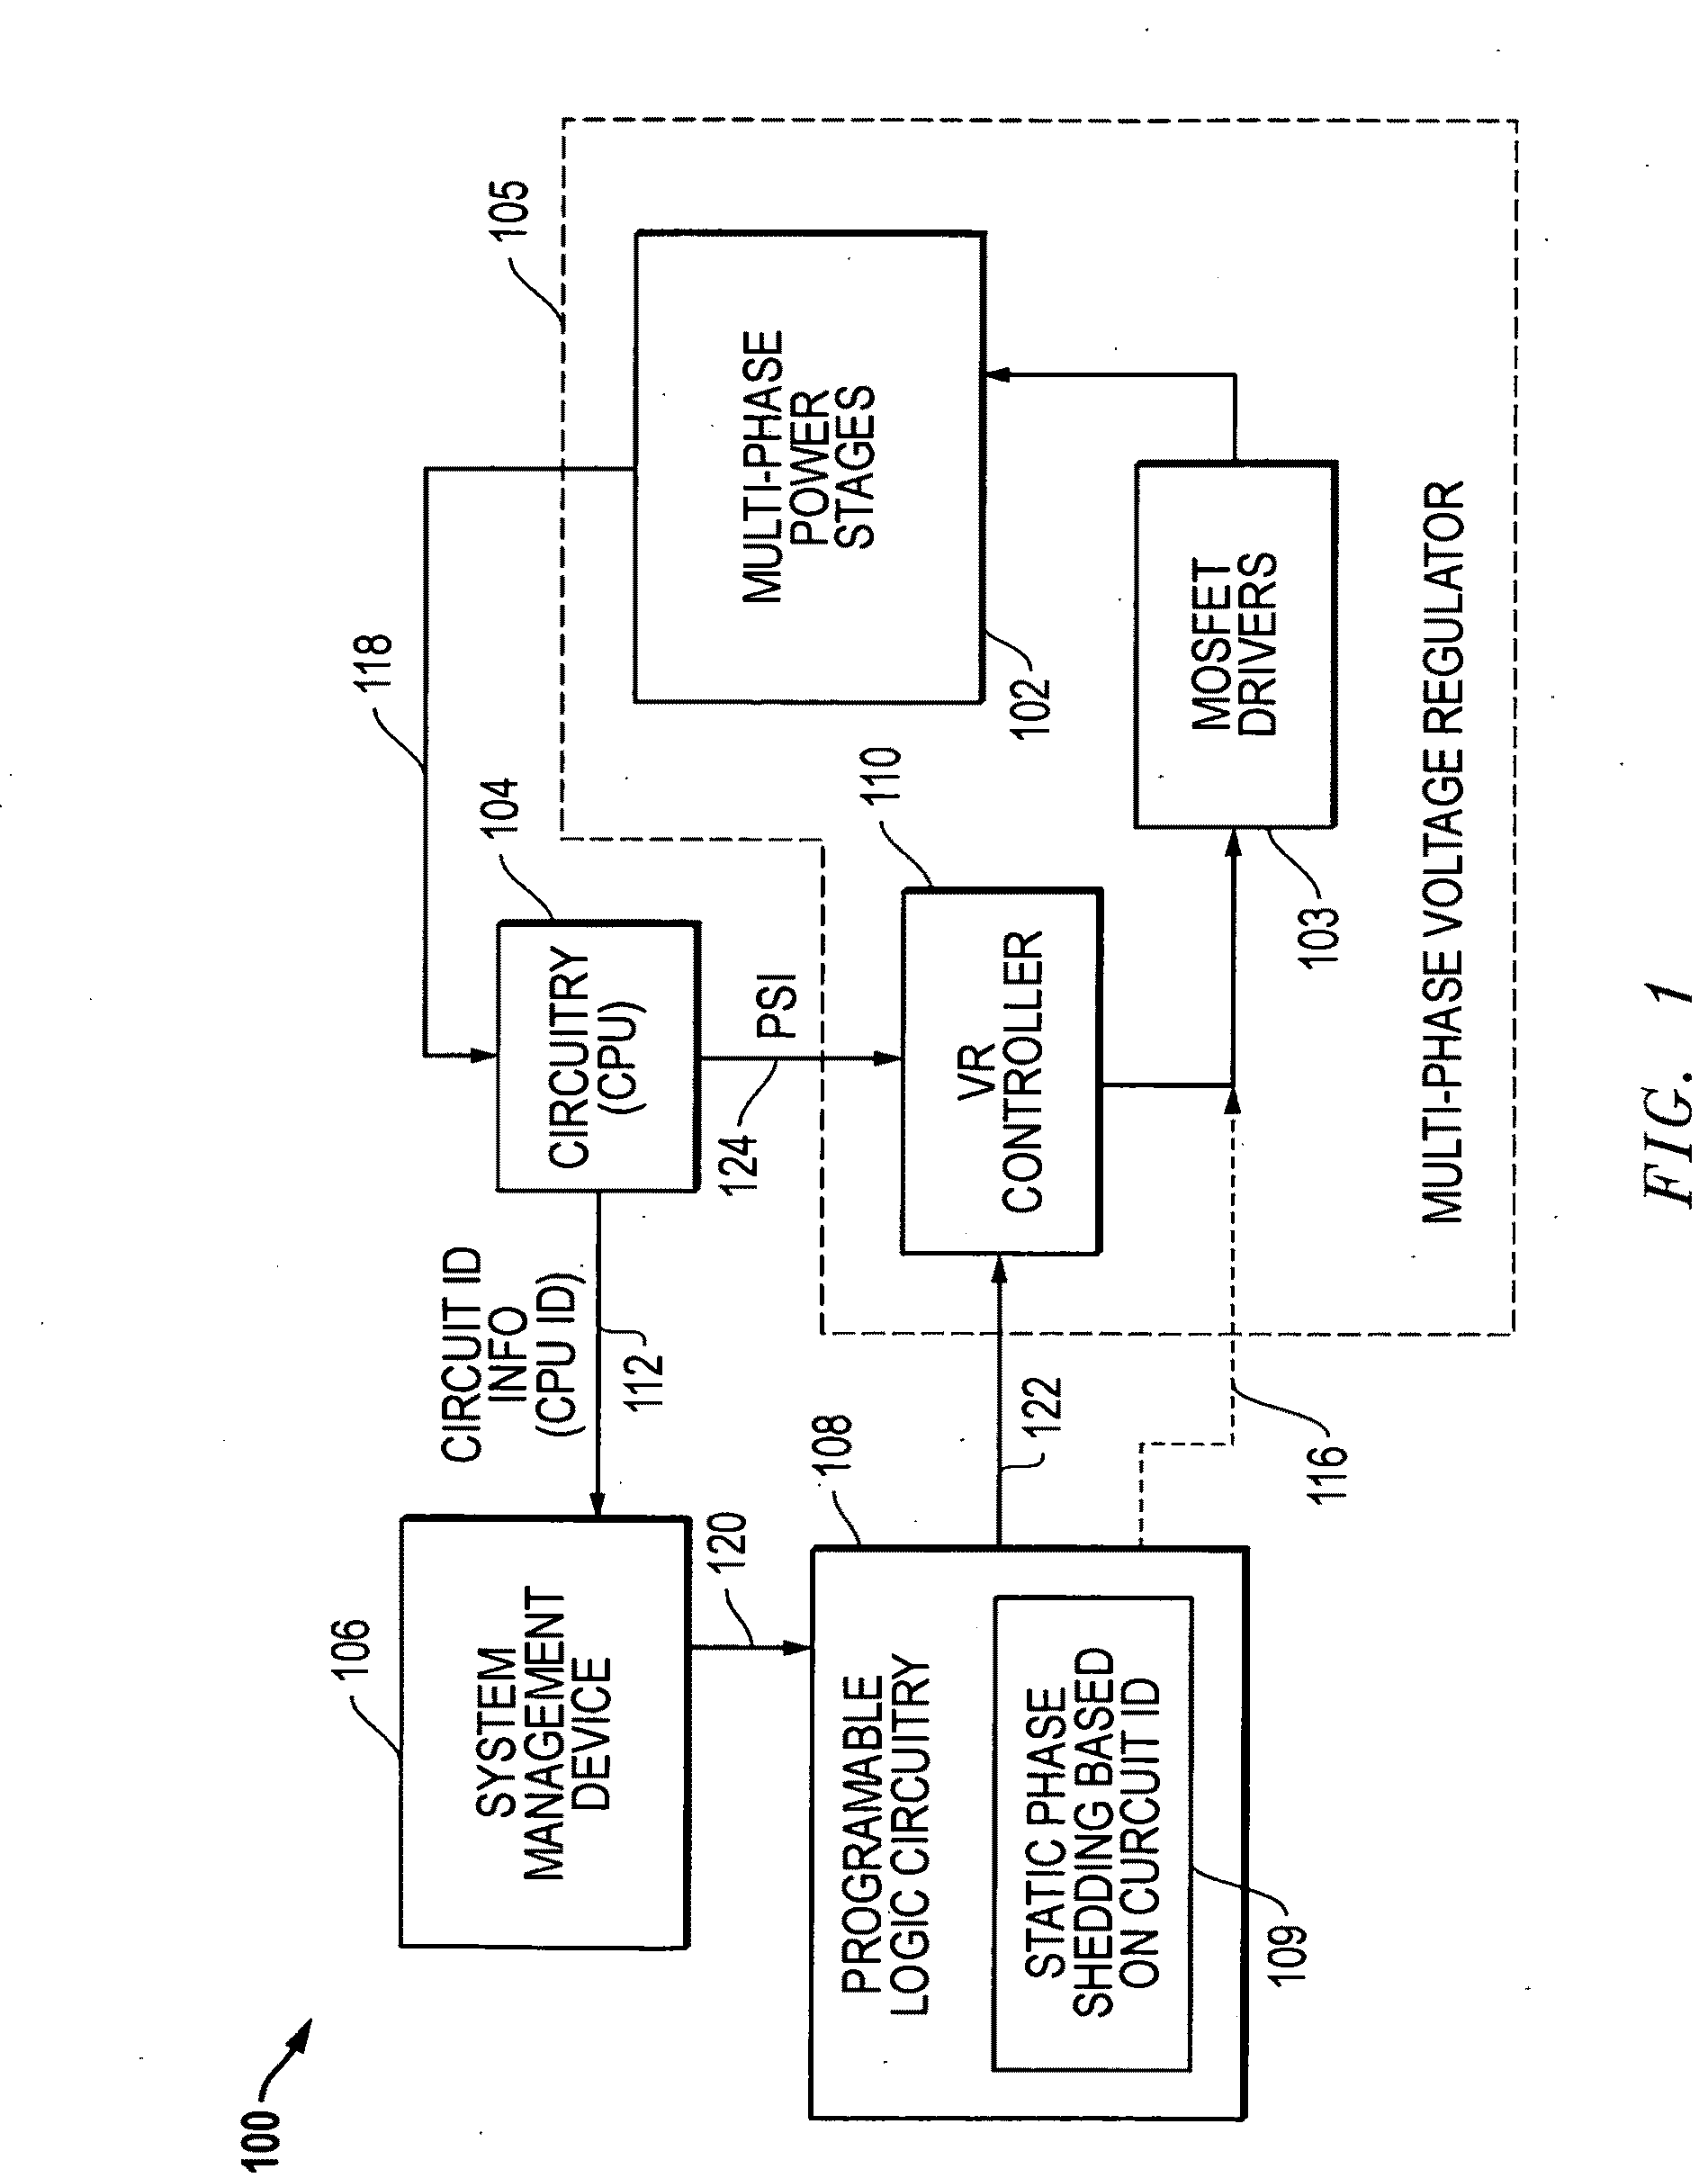 Static phase shedding for voltage regulators based upon circuit identifiers